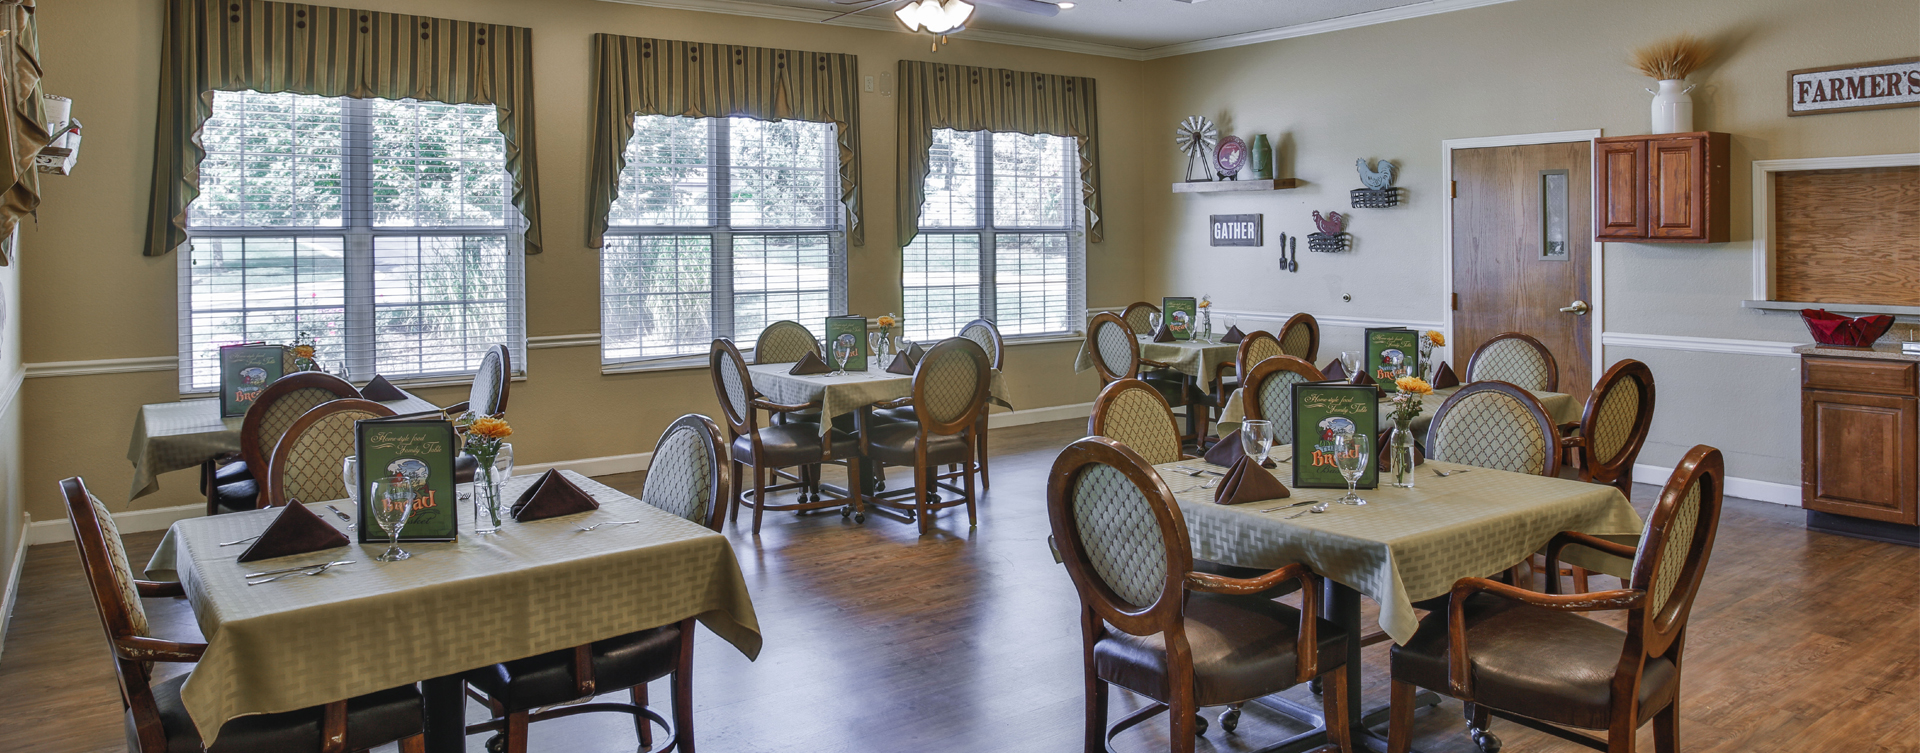 Mary B’s country kitchen evokes a sense of home and reconnects residents to past life skills at Bickford of Peoria